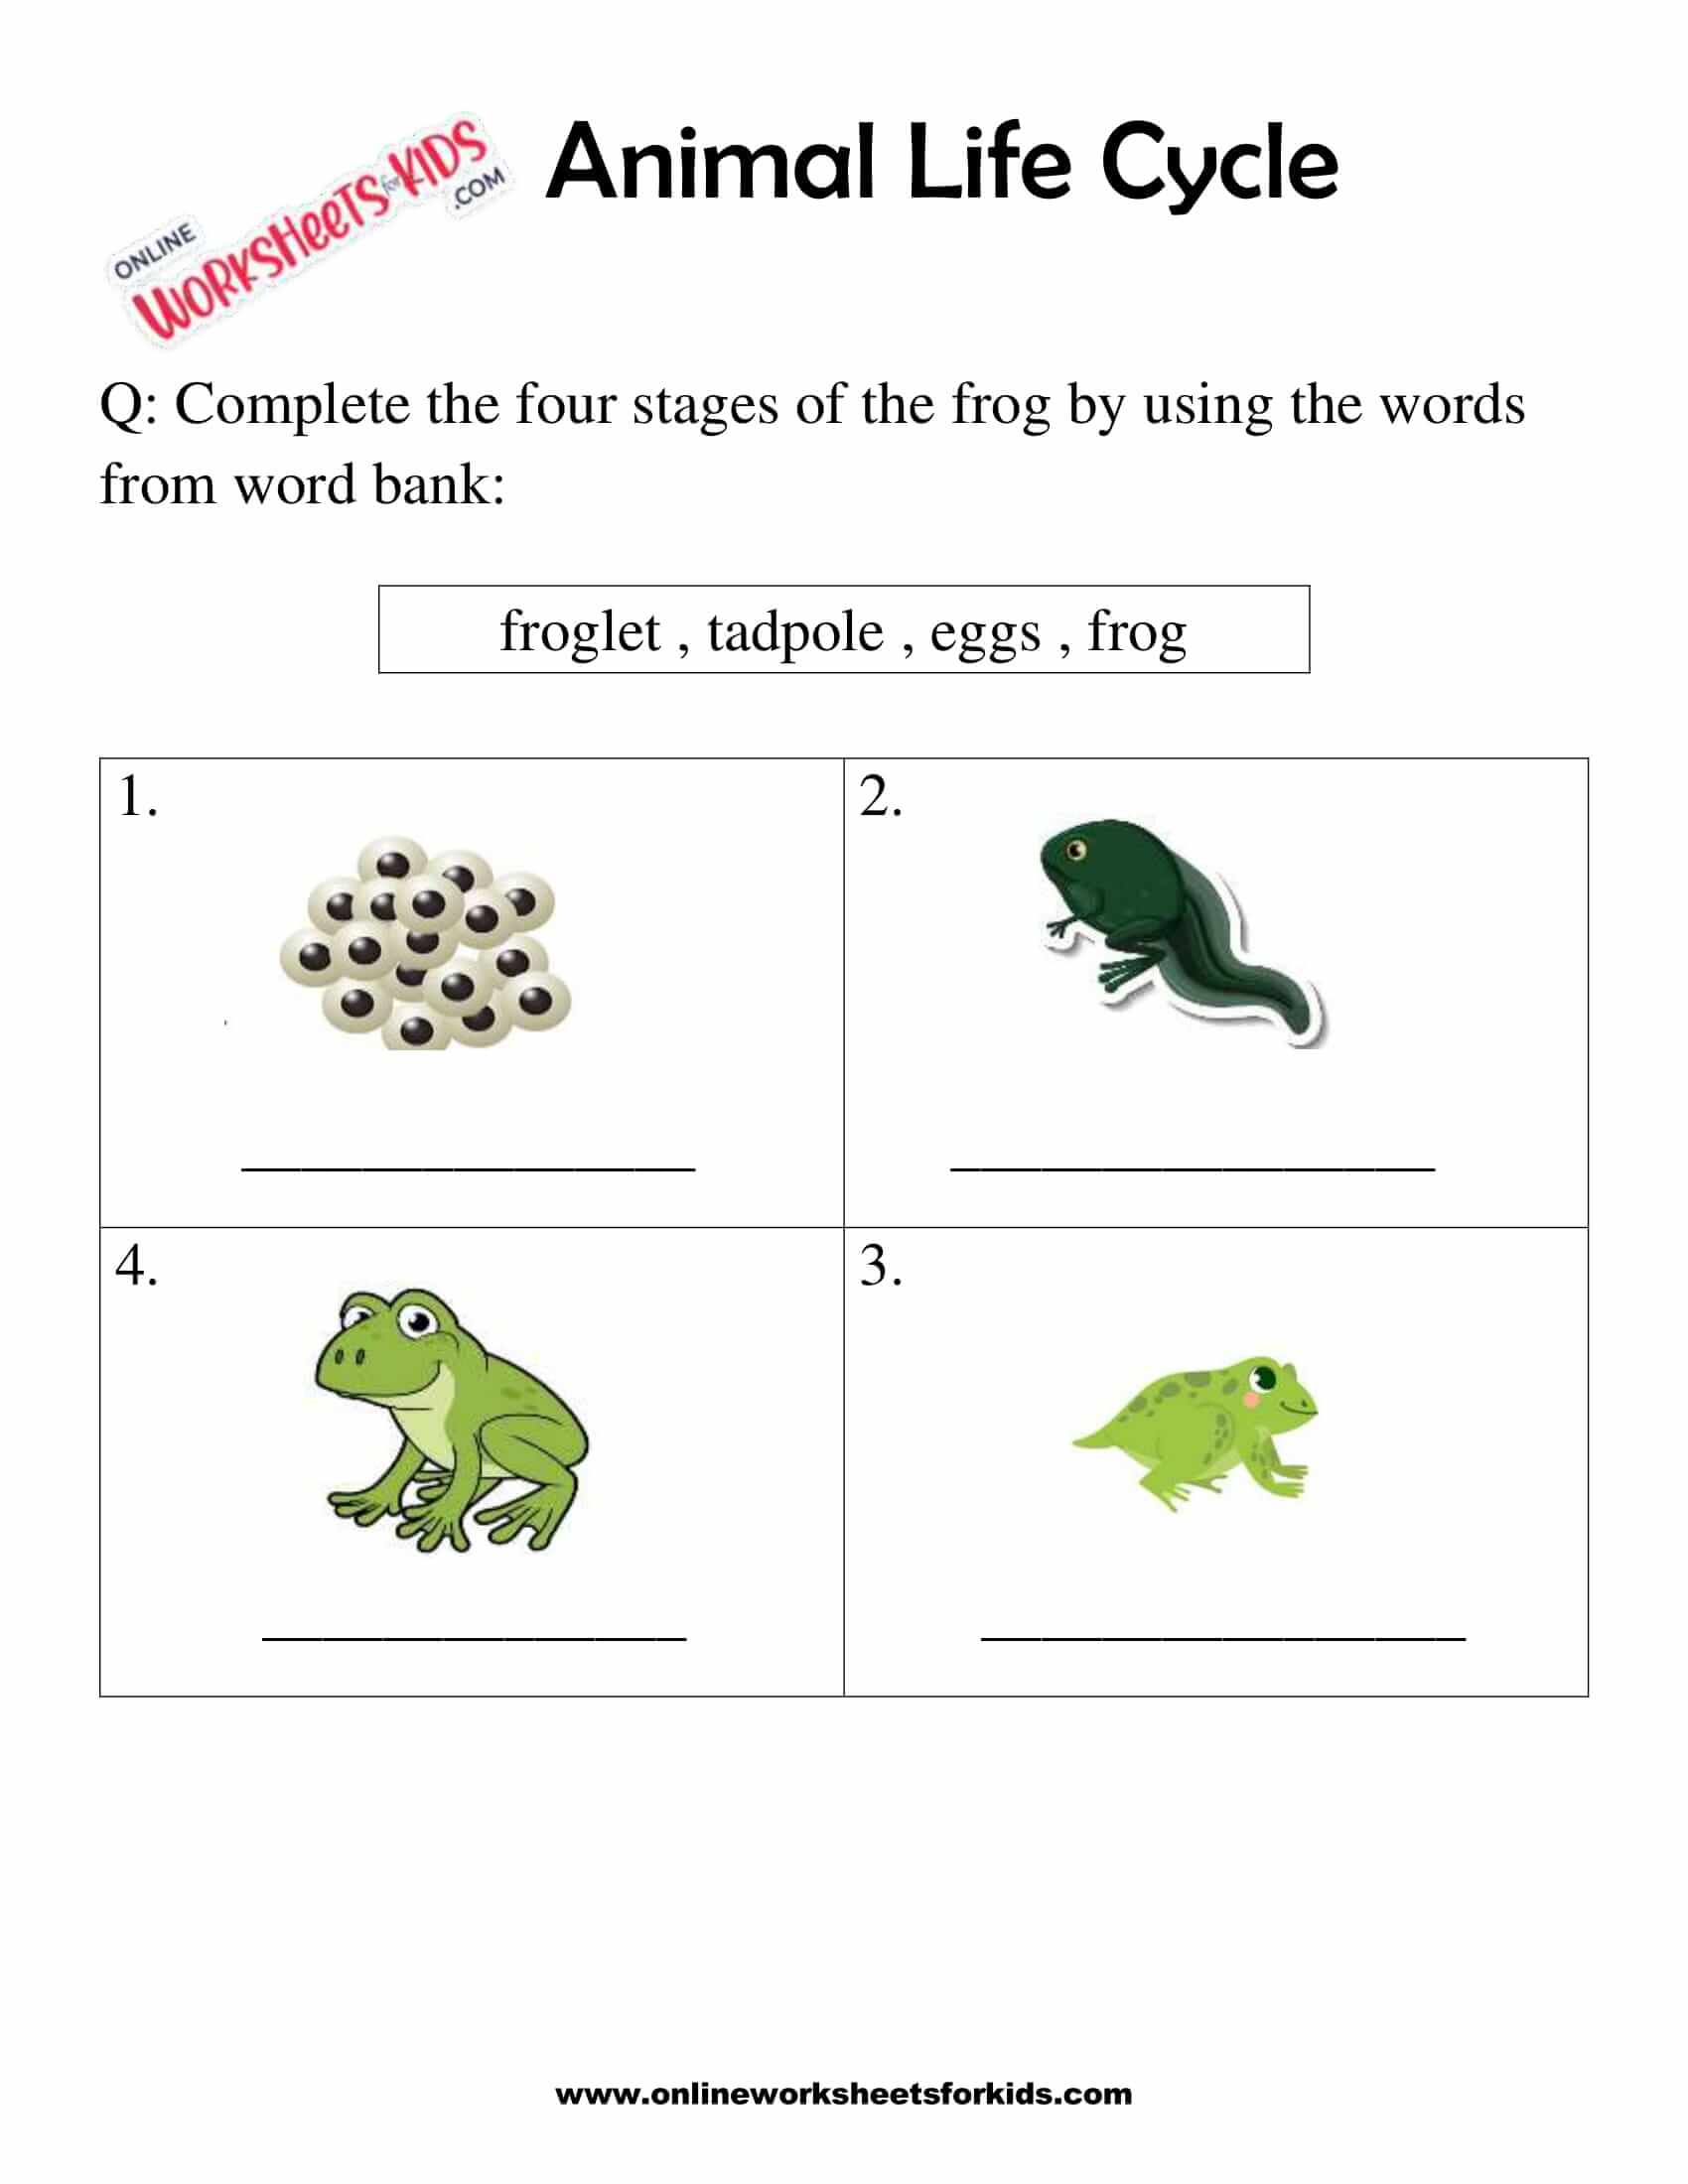 animal-life-cycle-worksheets-for-1st-grade-3